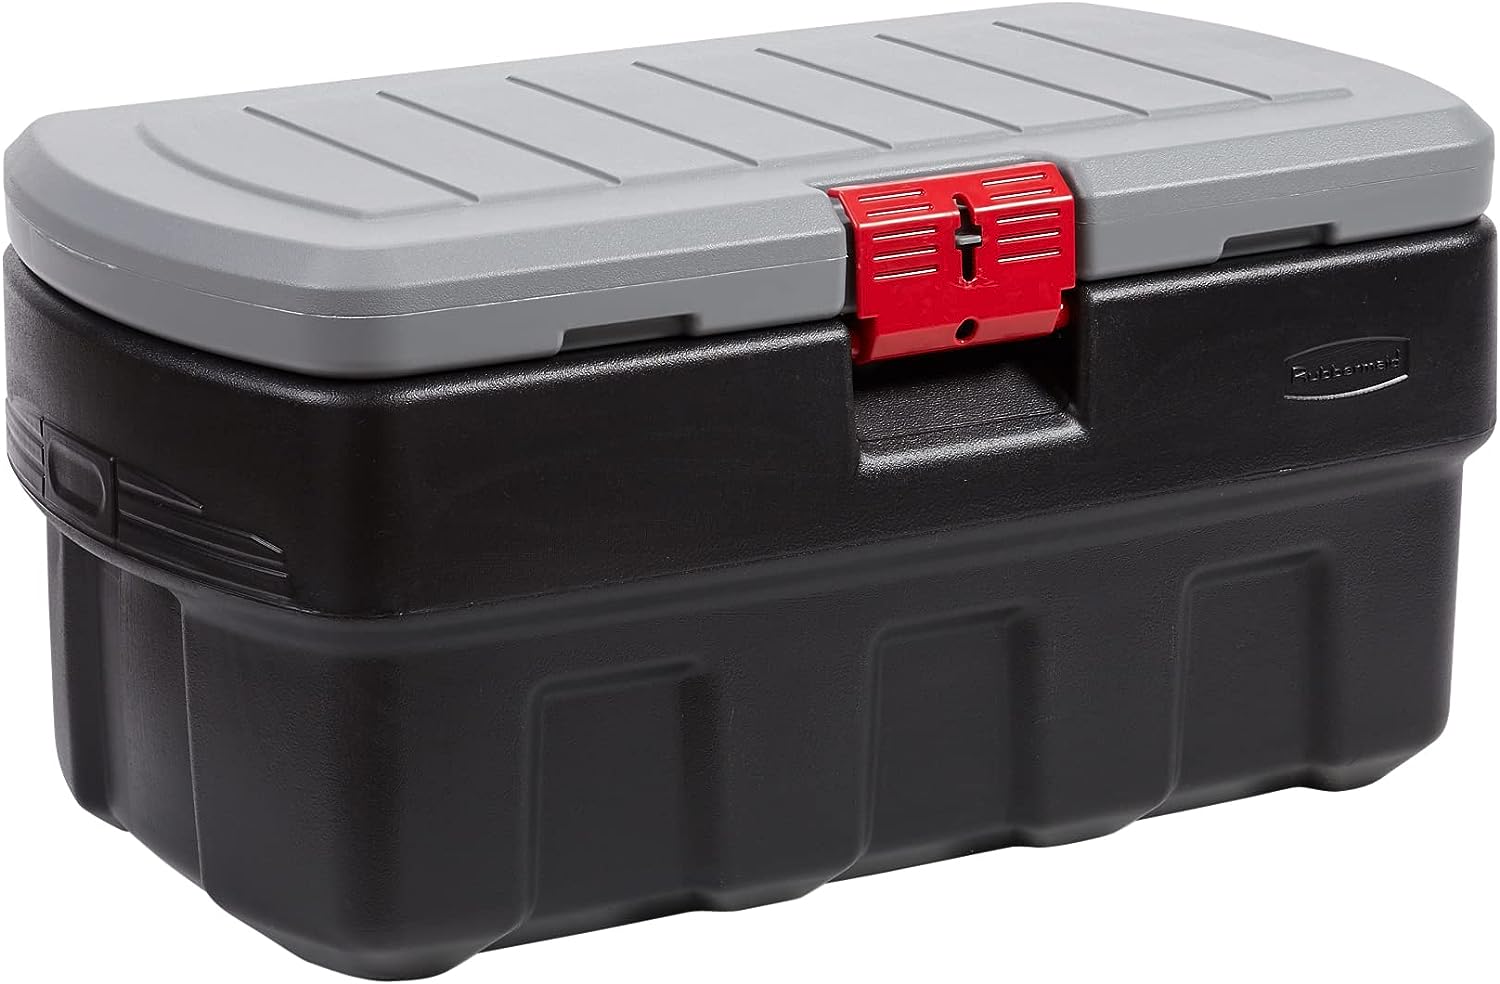 Rubbermaid ActionPacker Lockable Storage Box, 35 Gal, Grey and Black,  Outdoor, Industrial, Rugged